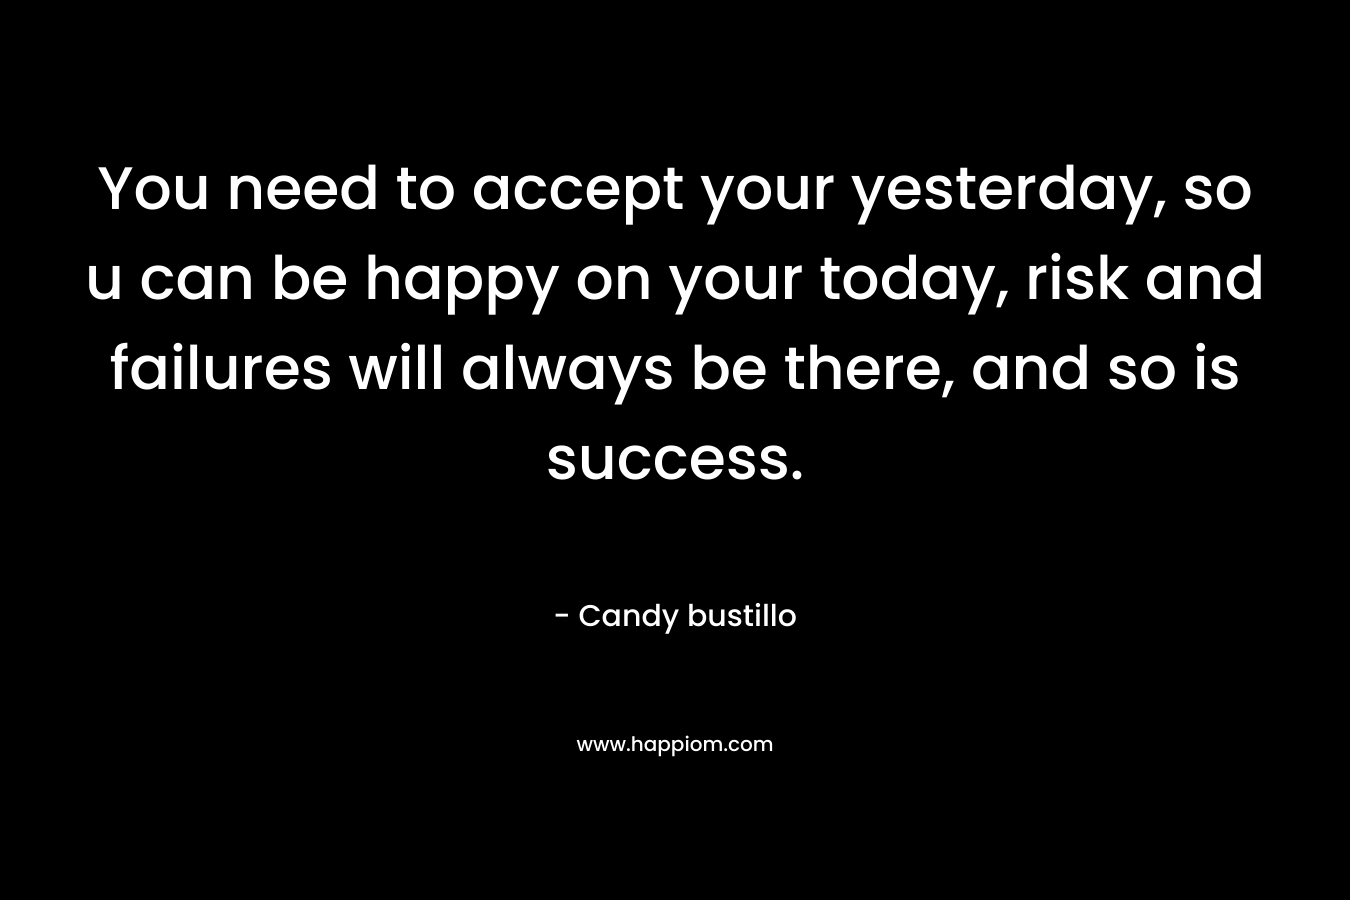 You need to accept your yesterday, so u can be happy on your today, risk and failures will always be there, and so is success.